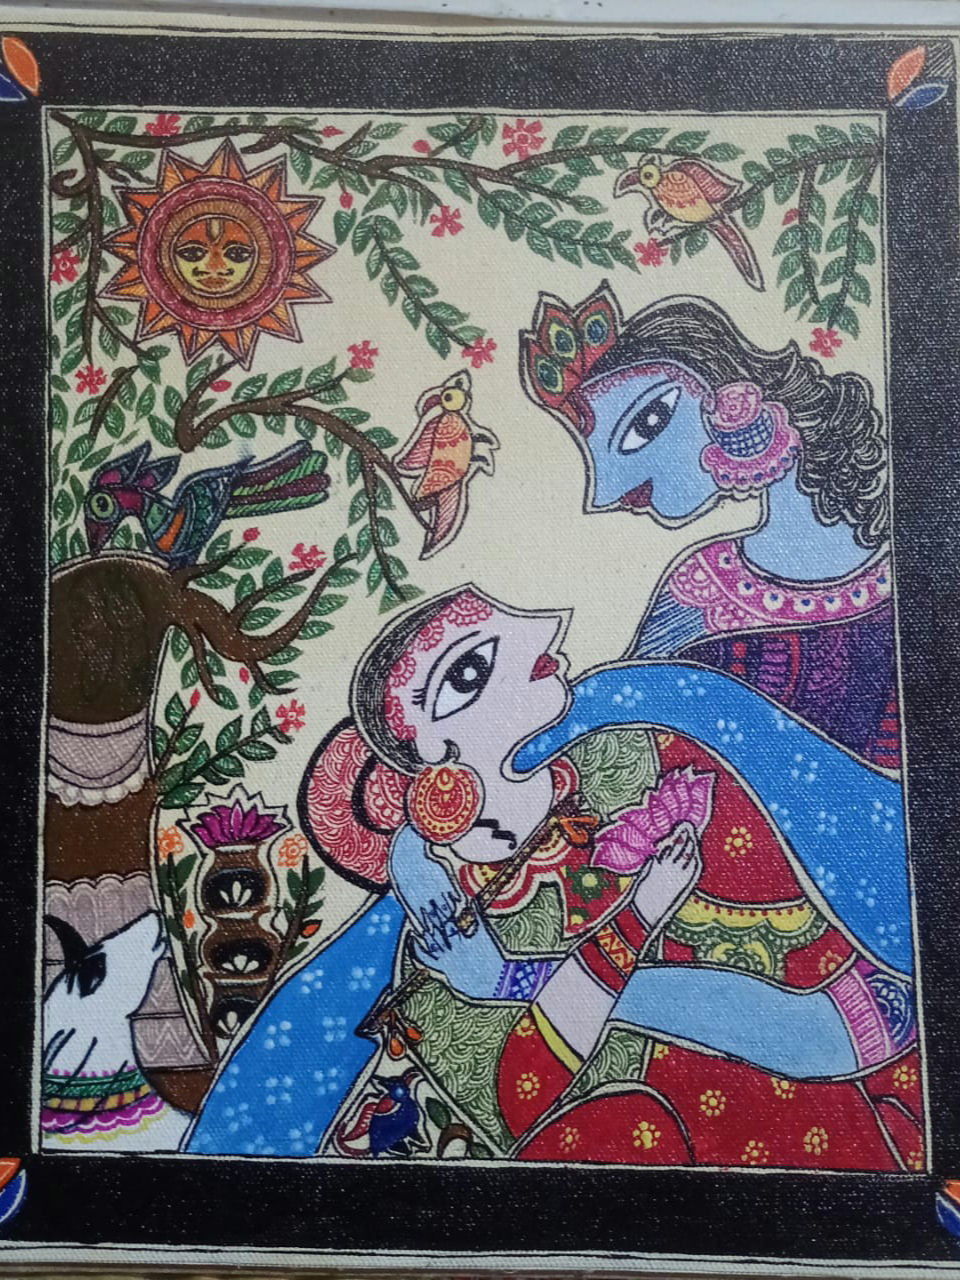 # This is an ancient form of painting from Madhubani, Bihar, India. Just gave it a try in depicting #